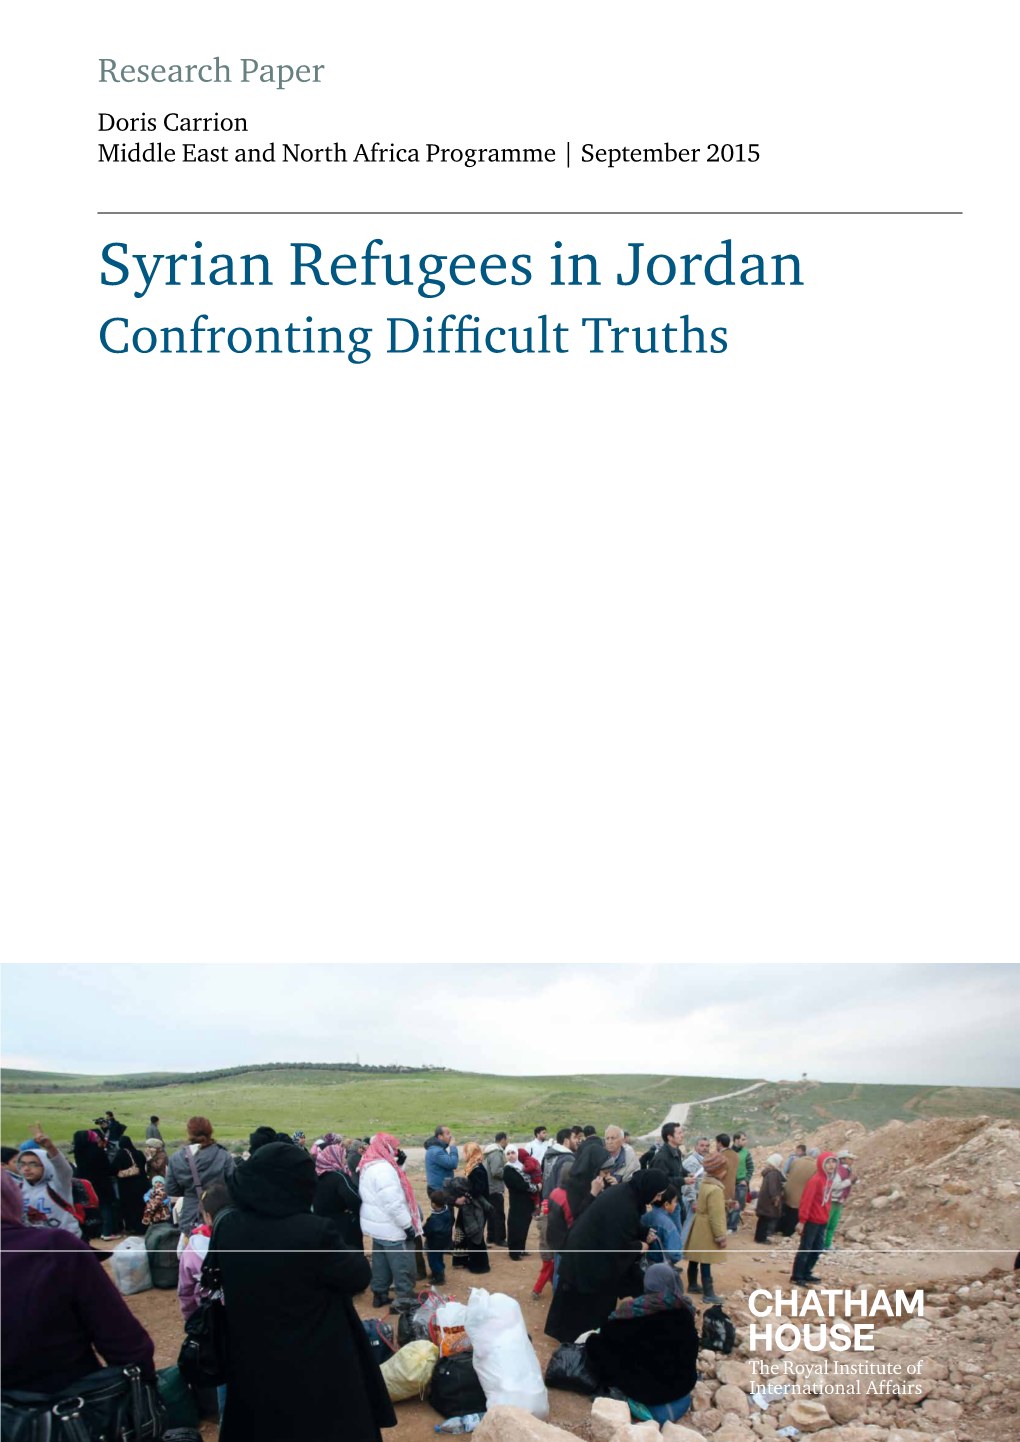 Syrian Refugees in Jordan Confronting Difficult Truths Syrian Refugees in Jordan: Confronting Difficult Truths